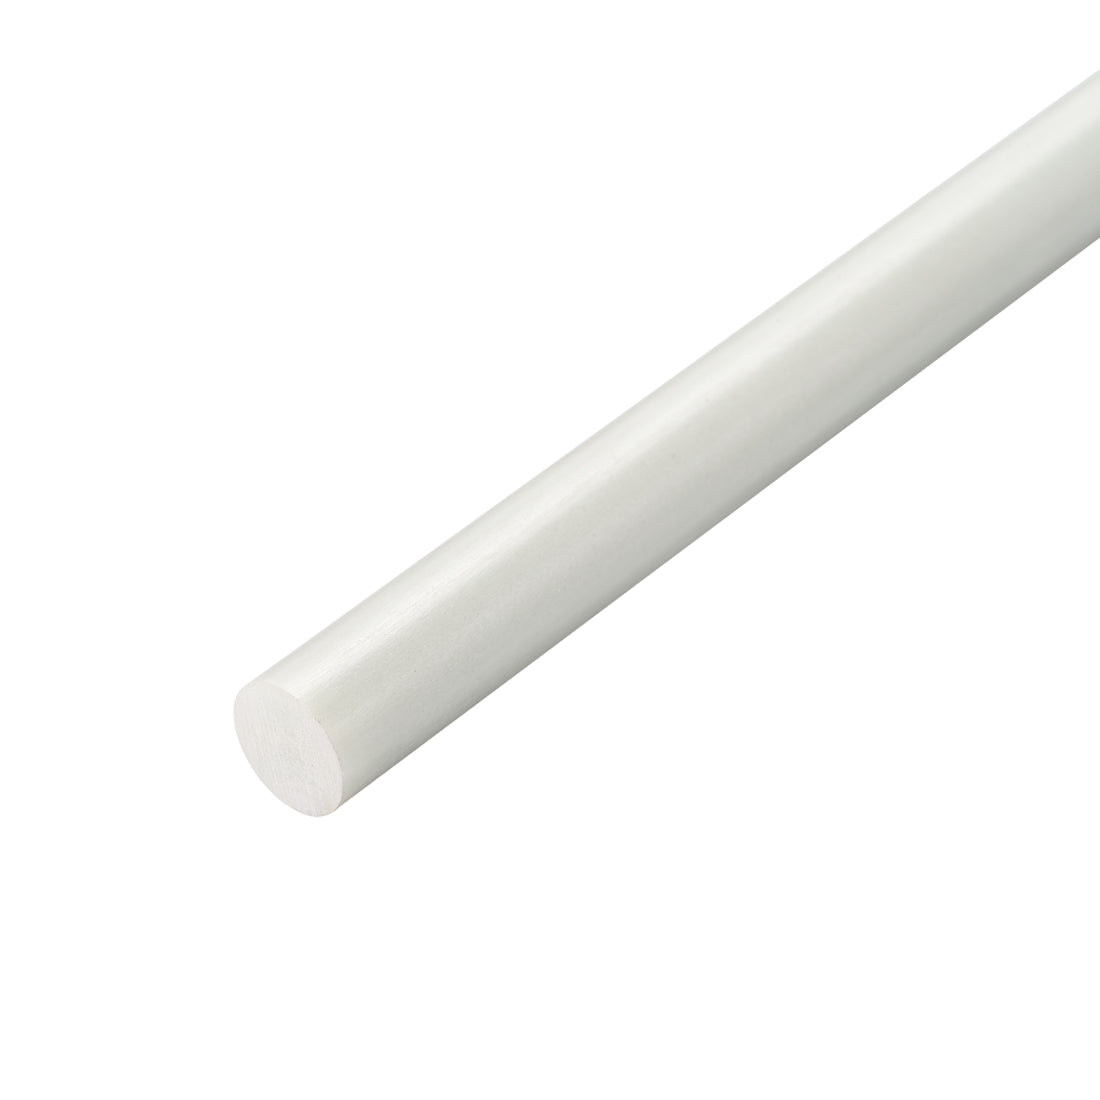 uxcell Uxcell FRP Fiberglass Round Rod,7mm Dia 50cm Long,White Engineering Round Bars Rods